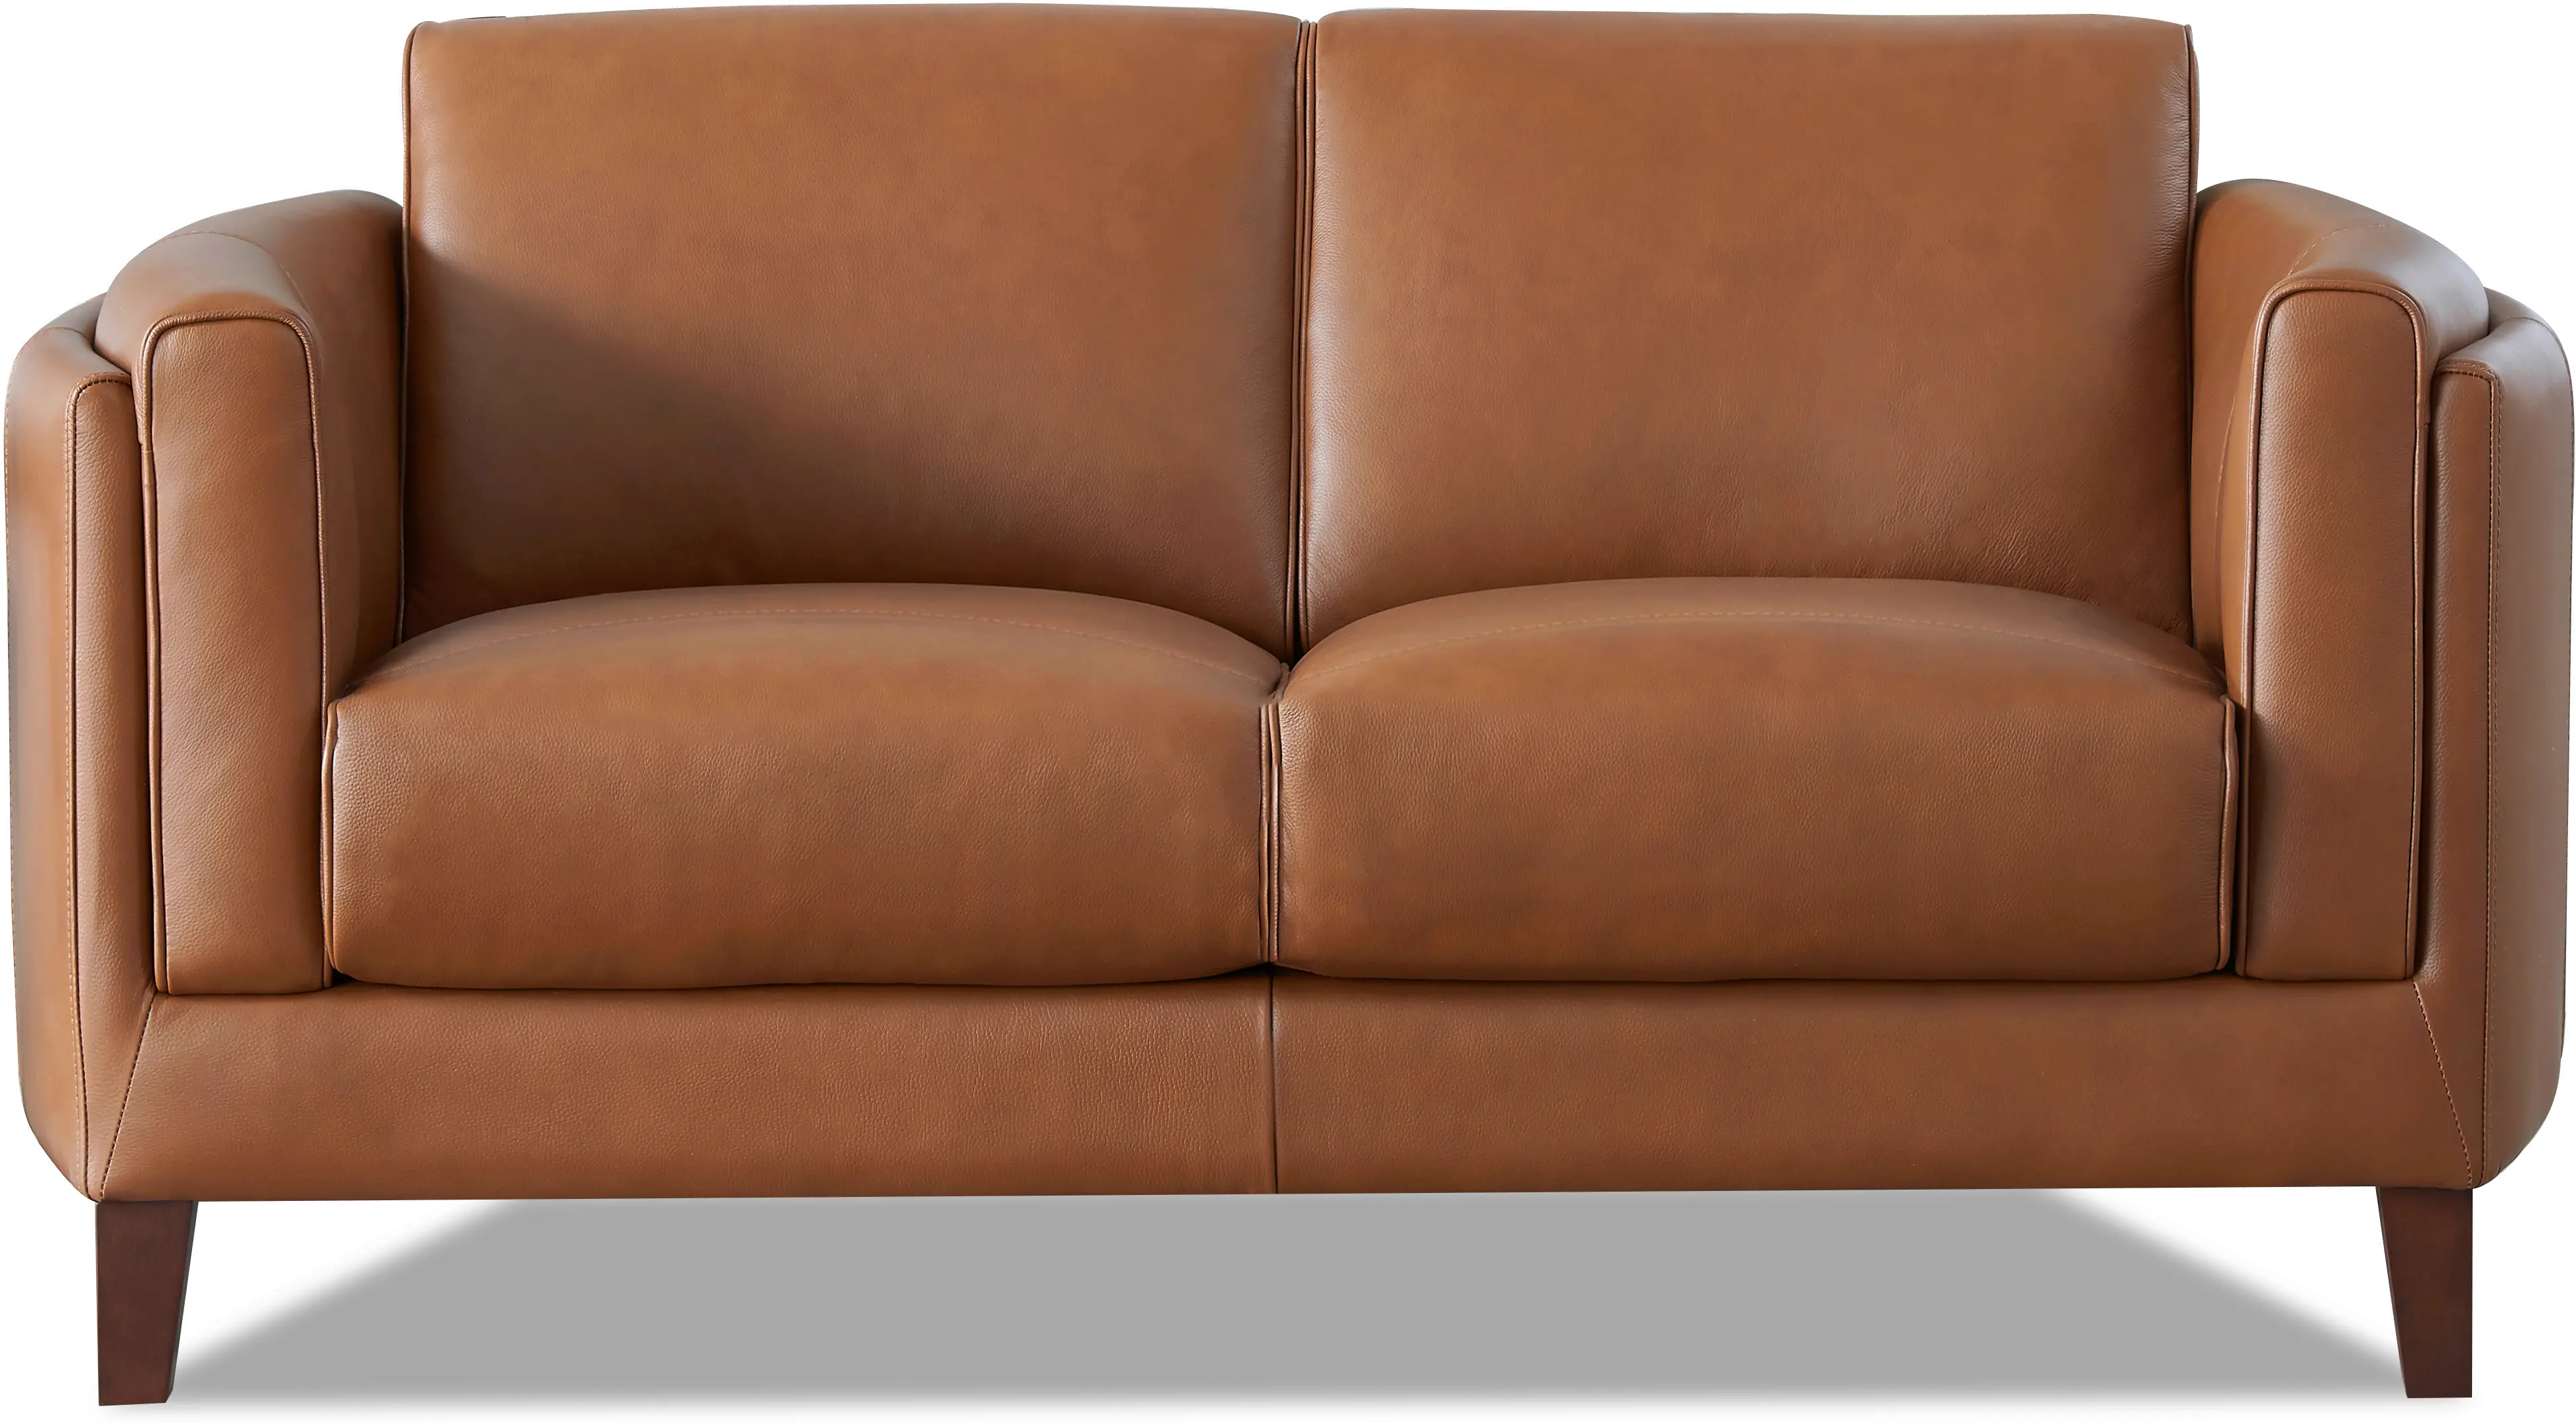 Pacer Nutmeg Top Grain Leather Loveseat - Amax Leather